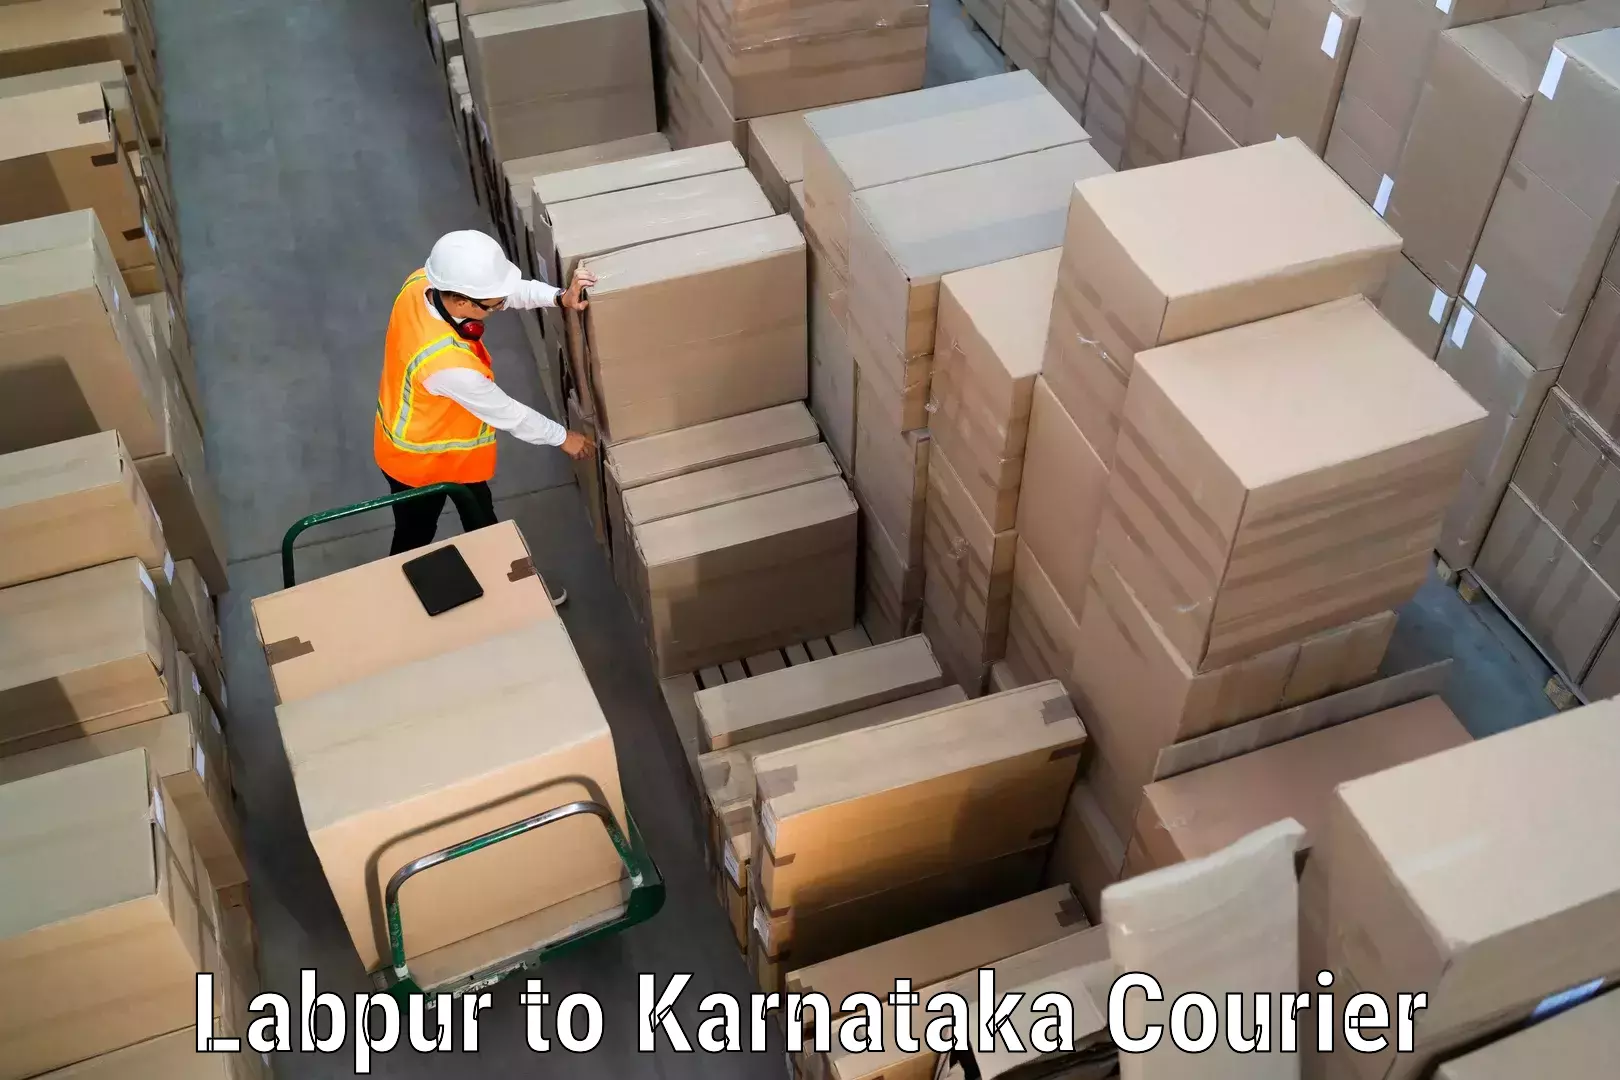 High-capacity courier solutions Labpur to Tumkur